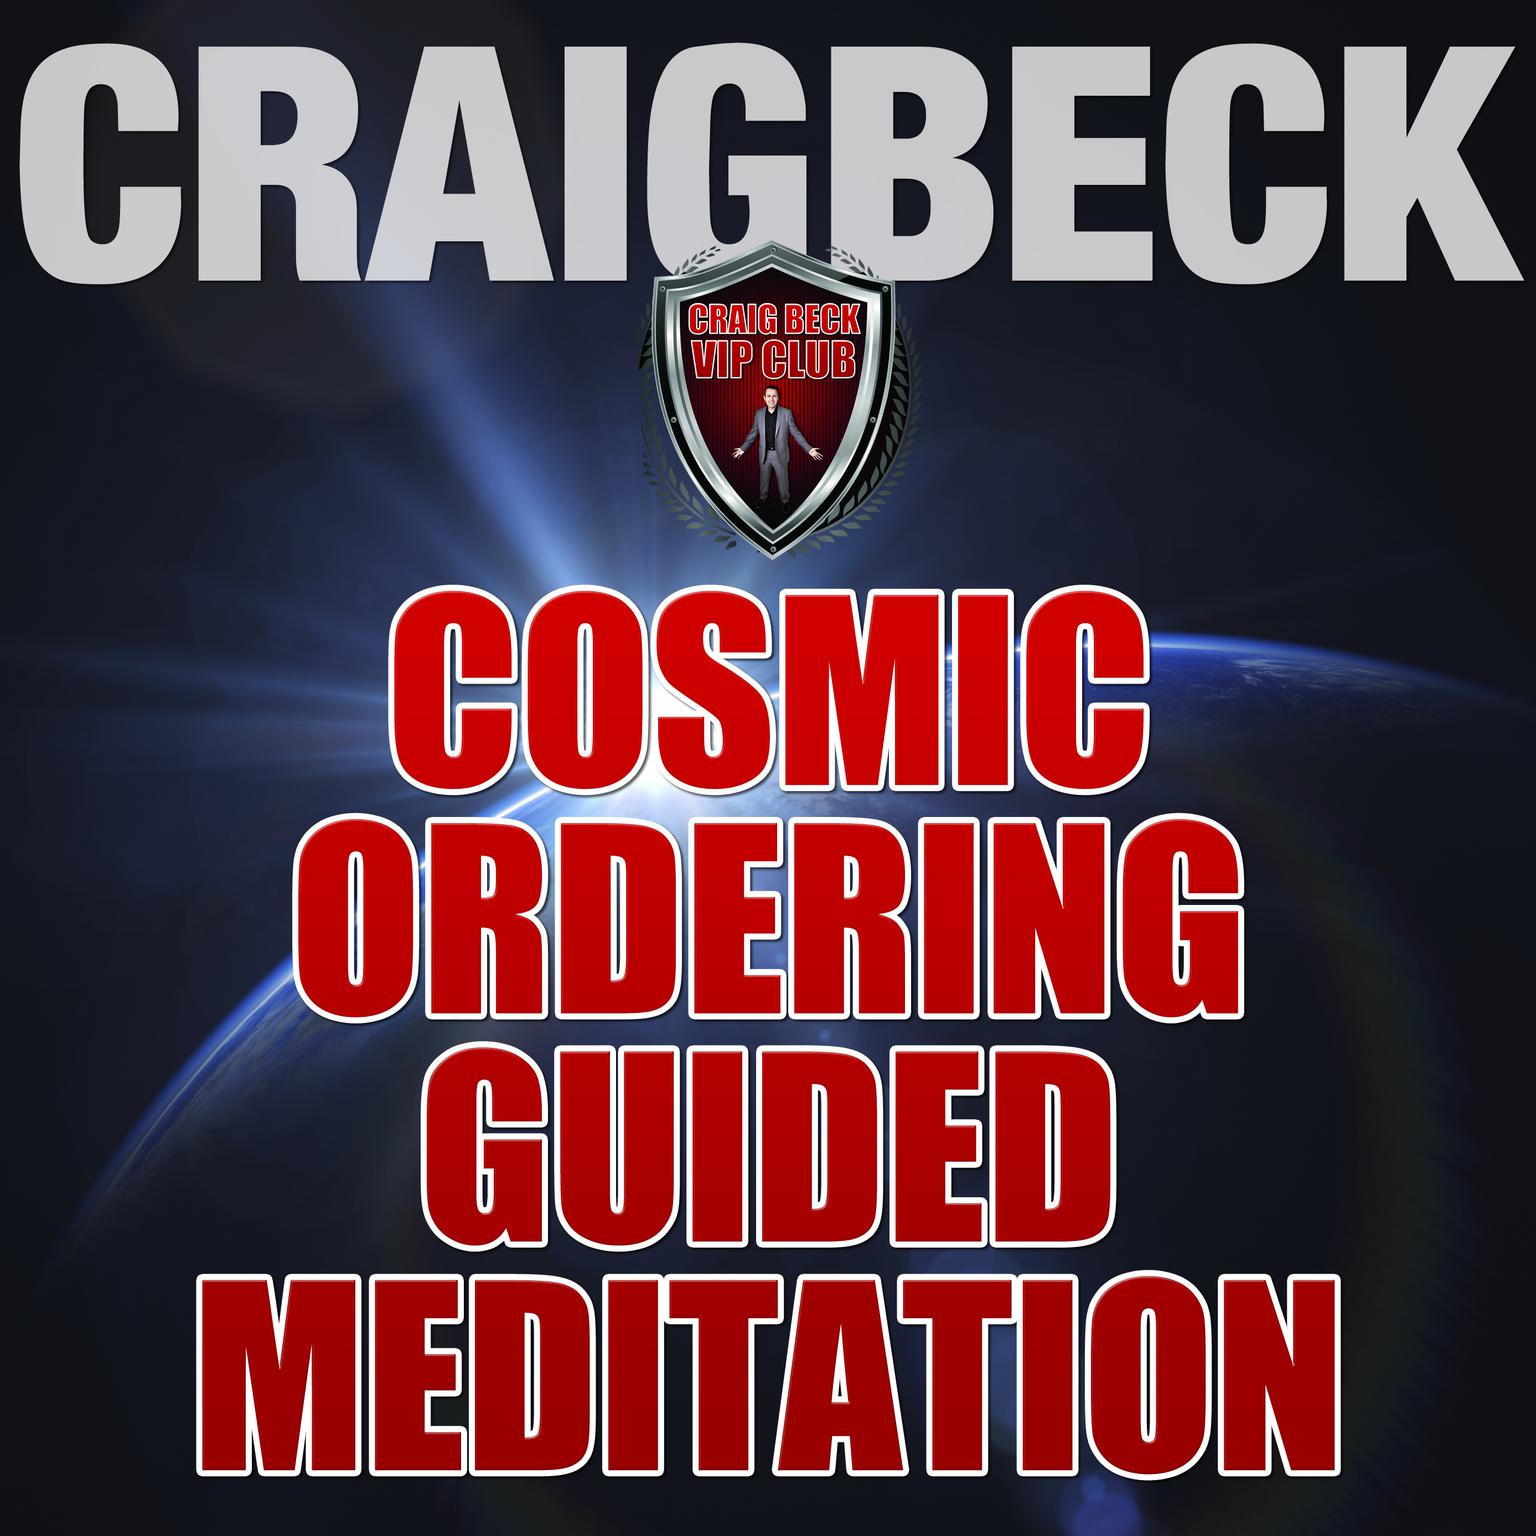 Cosmic Ordering Guided Meditation: Pineal Gland Activation Audiobook, by Craig Beck